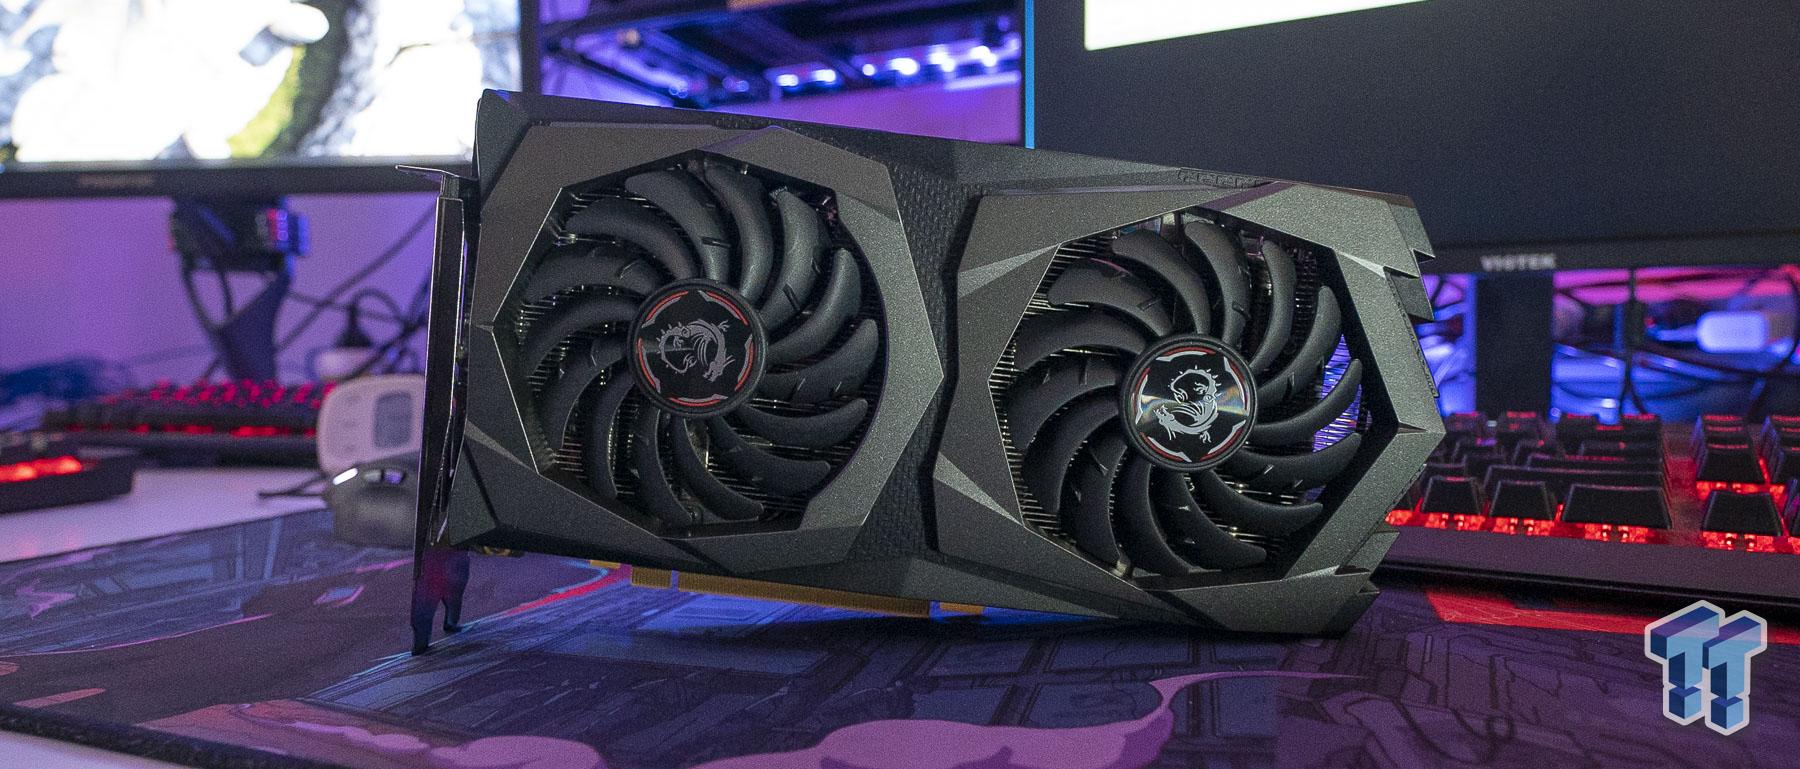 1650 super gaming x. GTX 1650 super Gaming x. GTX 1650 MSI Gaming x. [GTX 1650 super Gaming x 4g] фото. Best Graphics Card for Gaming 2018.